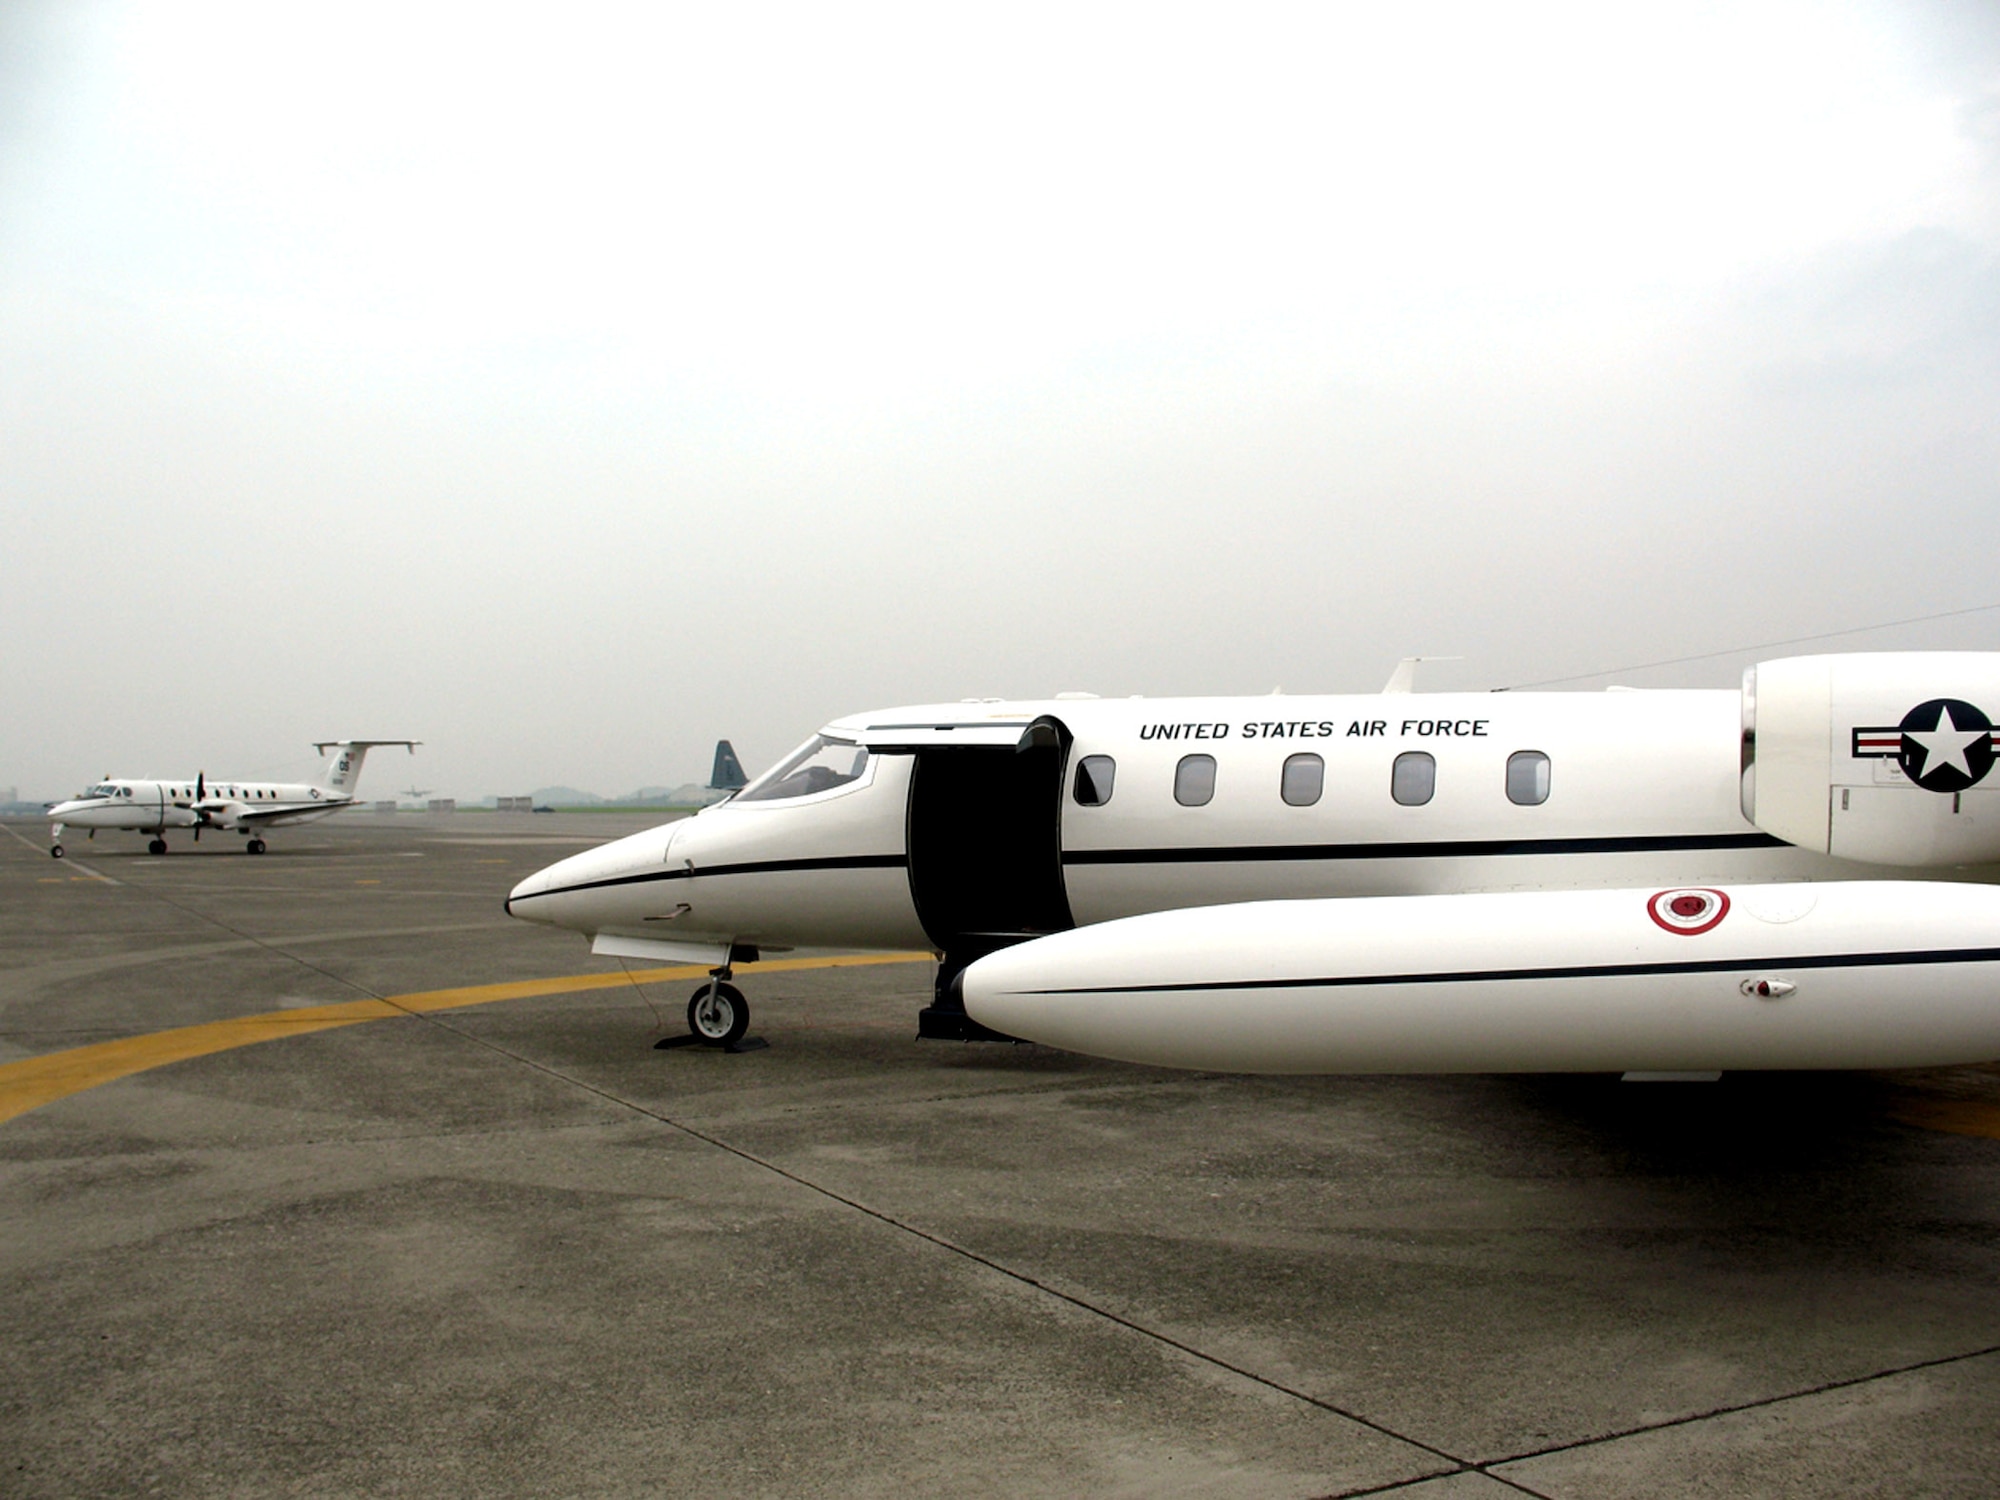 The C-12J Huron (left) arrives as the C-21 transport jet prepares to leave after serving for 21 years June 29 on Yokota Air Base, Japan. The C-12 is roomier than its predecessor, and has the ability to carry more people and land in more remote areas. (U.S. Air Force photo/Navy Seaman A.C. Rainey)